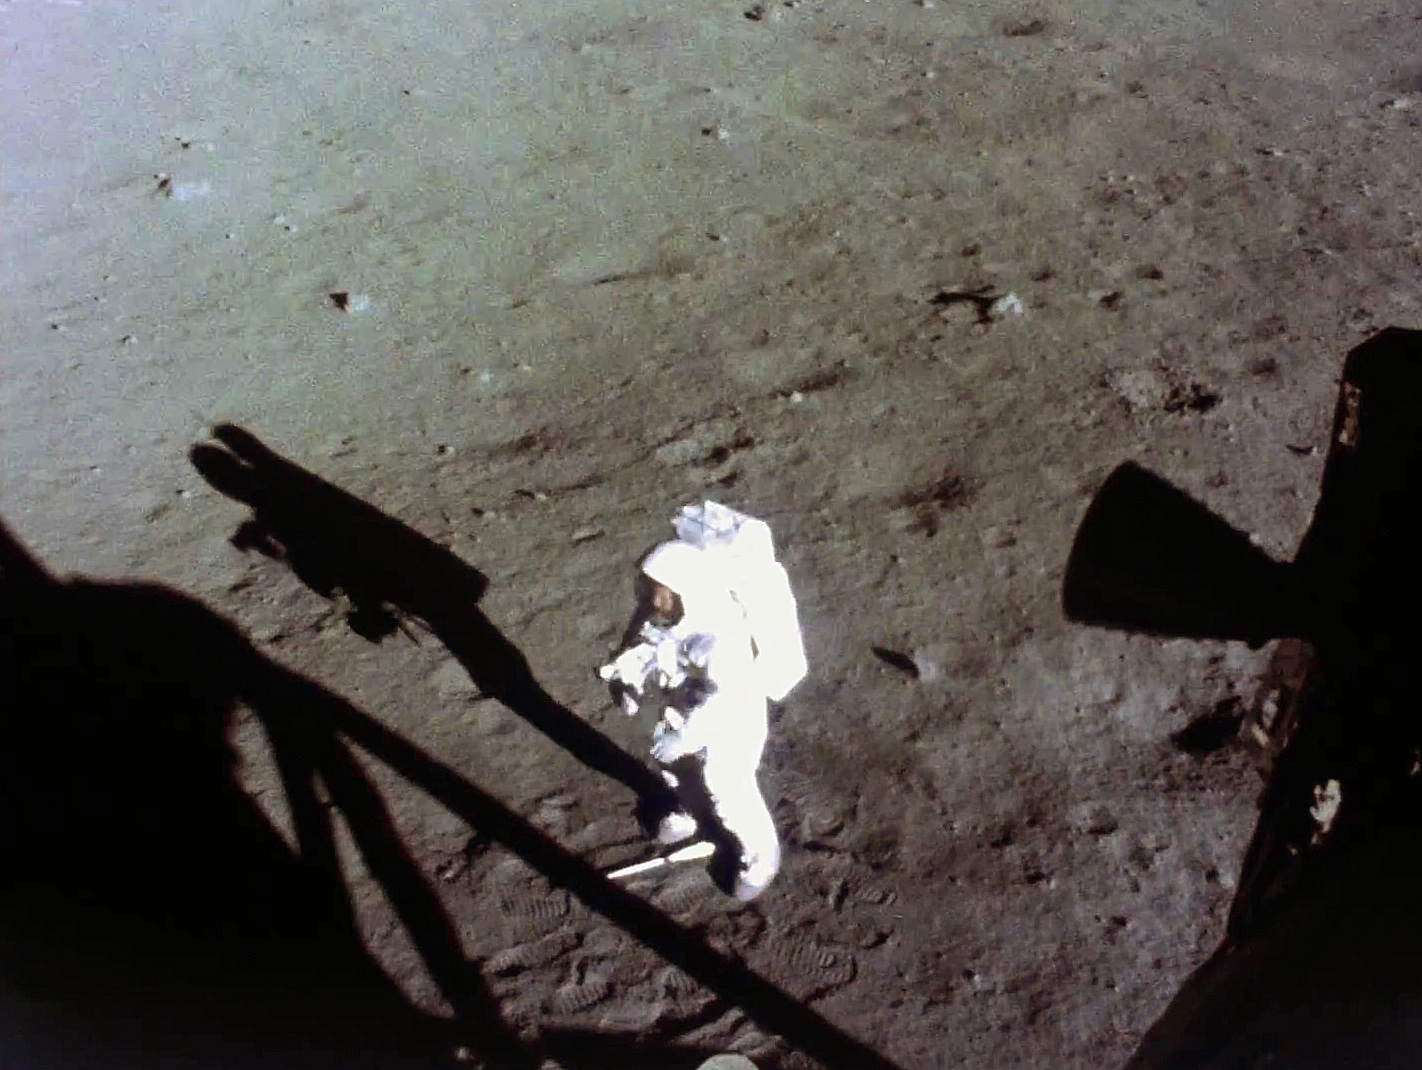 neil-armstrong-with-his-gold-visor-raised-and-face-visible-works-near-the-lm-early-in-the-apollo-11-eva.jpg